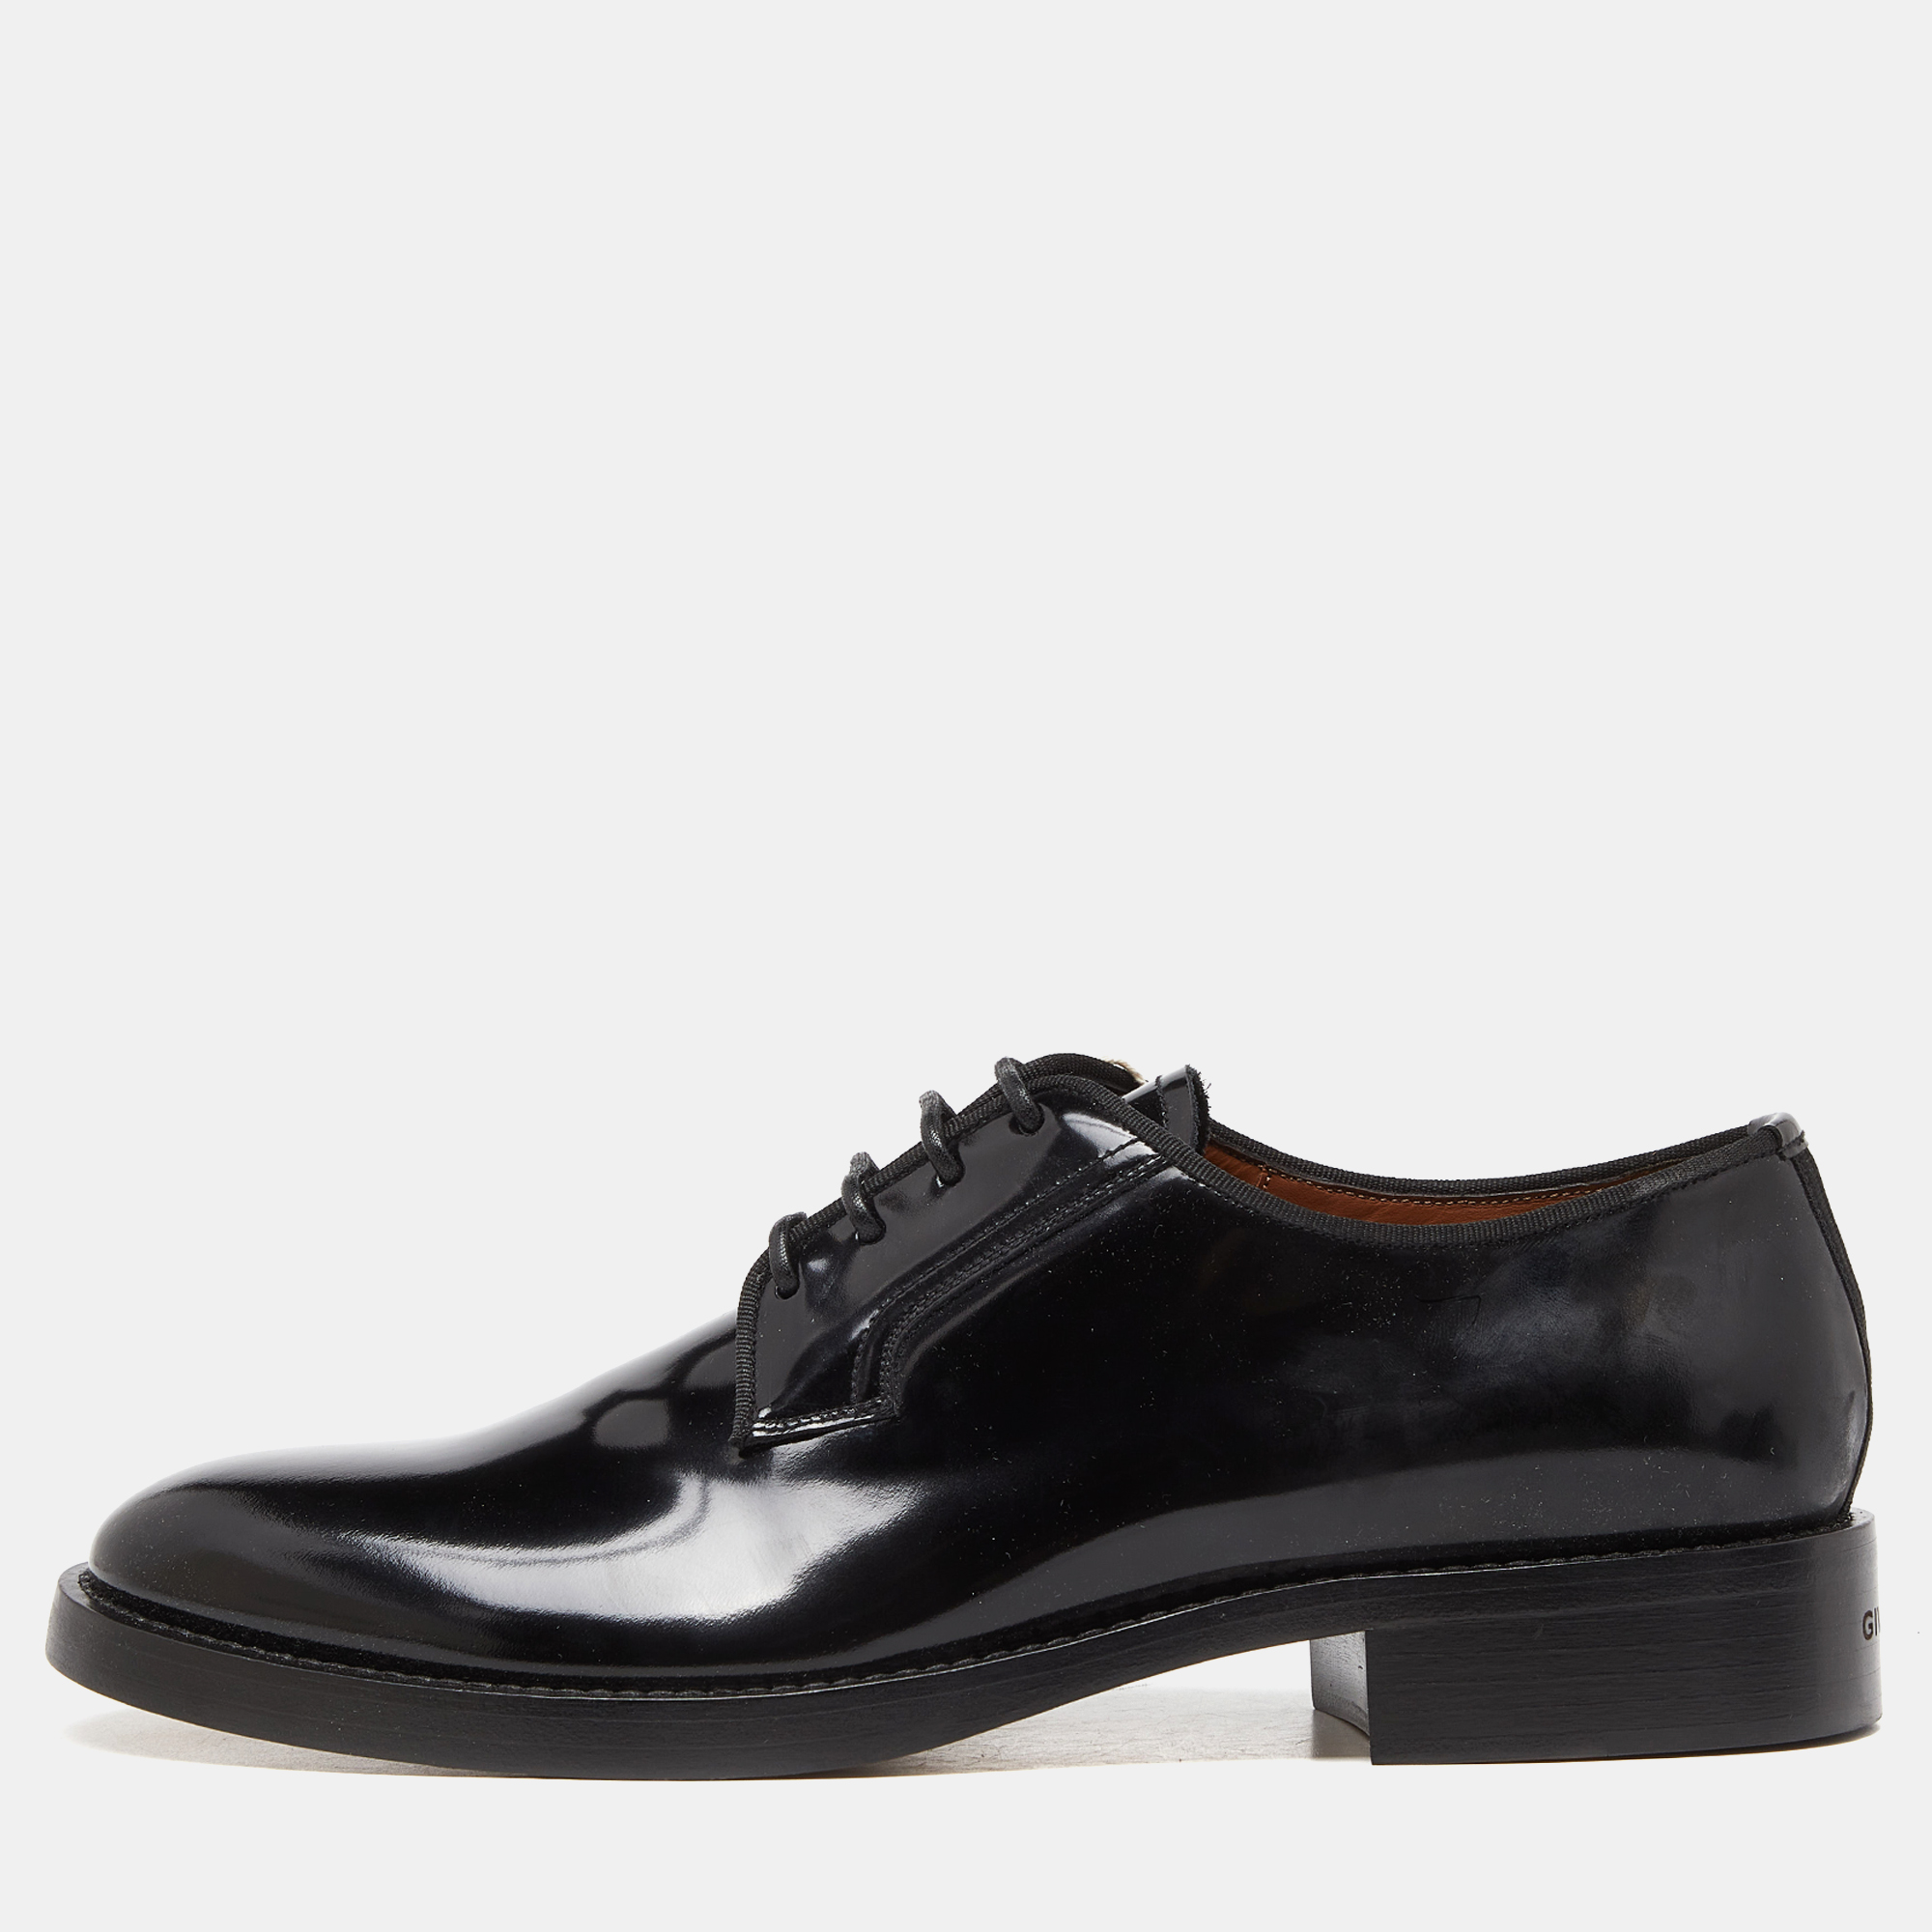 

Givenchy Black Patent Leather Derby